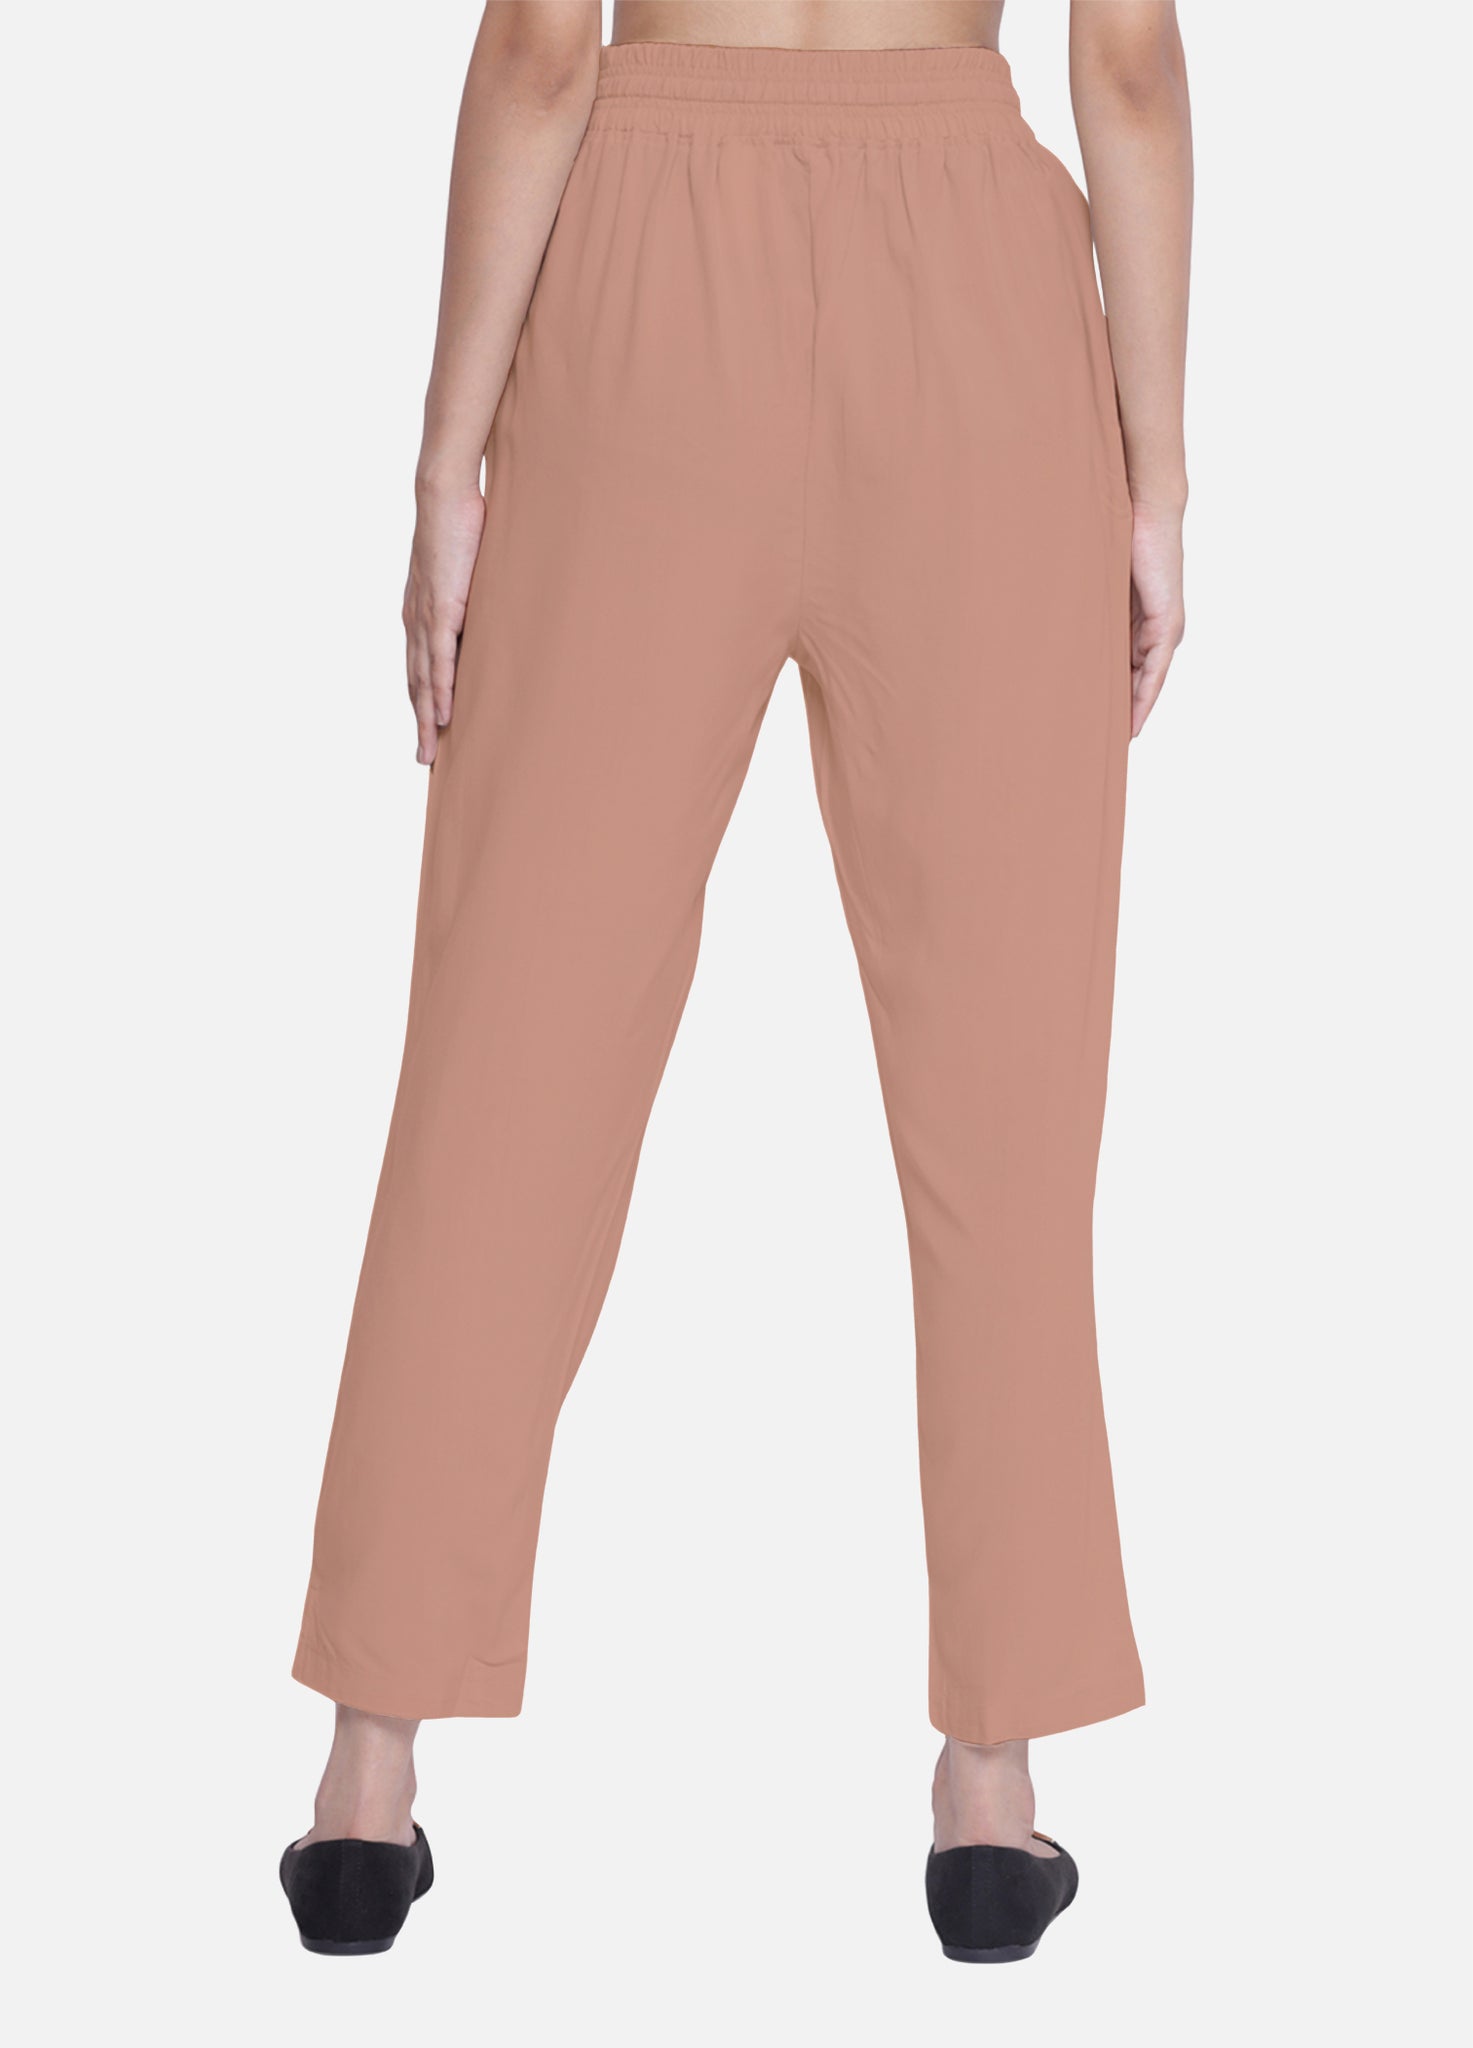 Buy Yash Gallery Women Pink Regular fit Cigarette pants Online at Low  Prices in India - Paytmmall.com